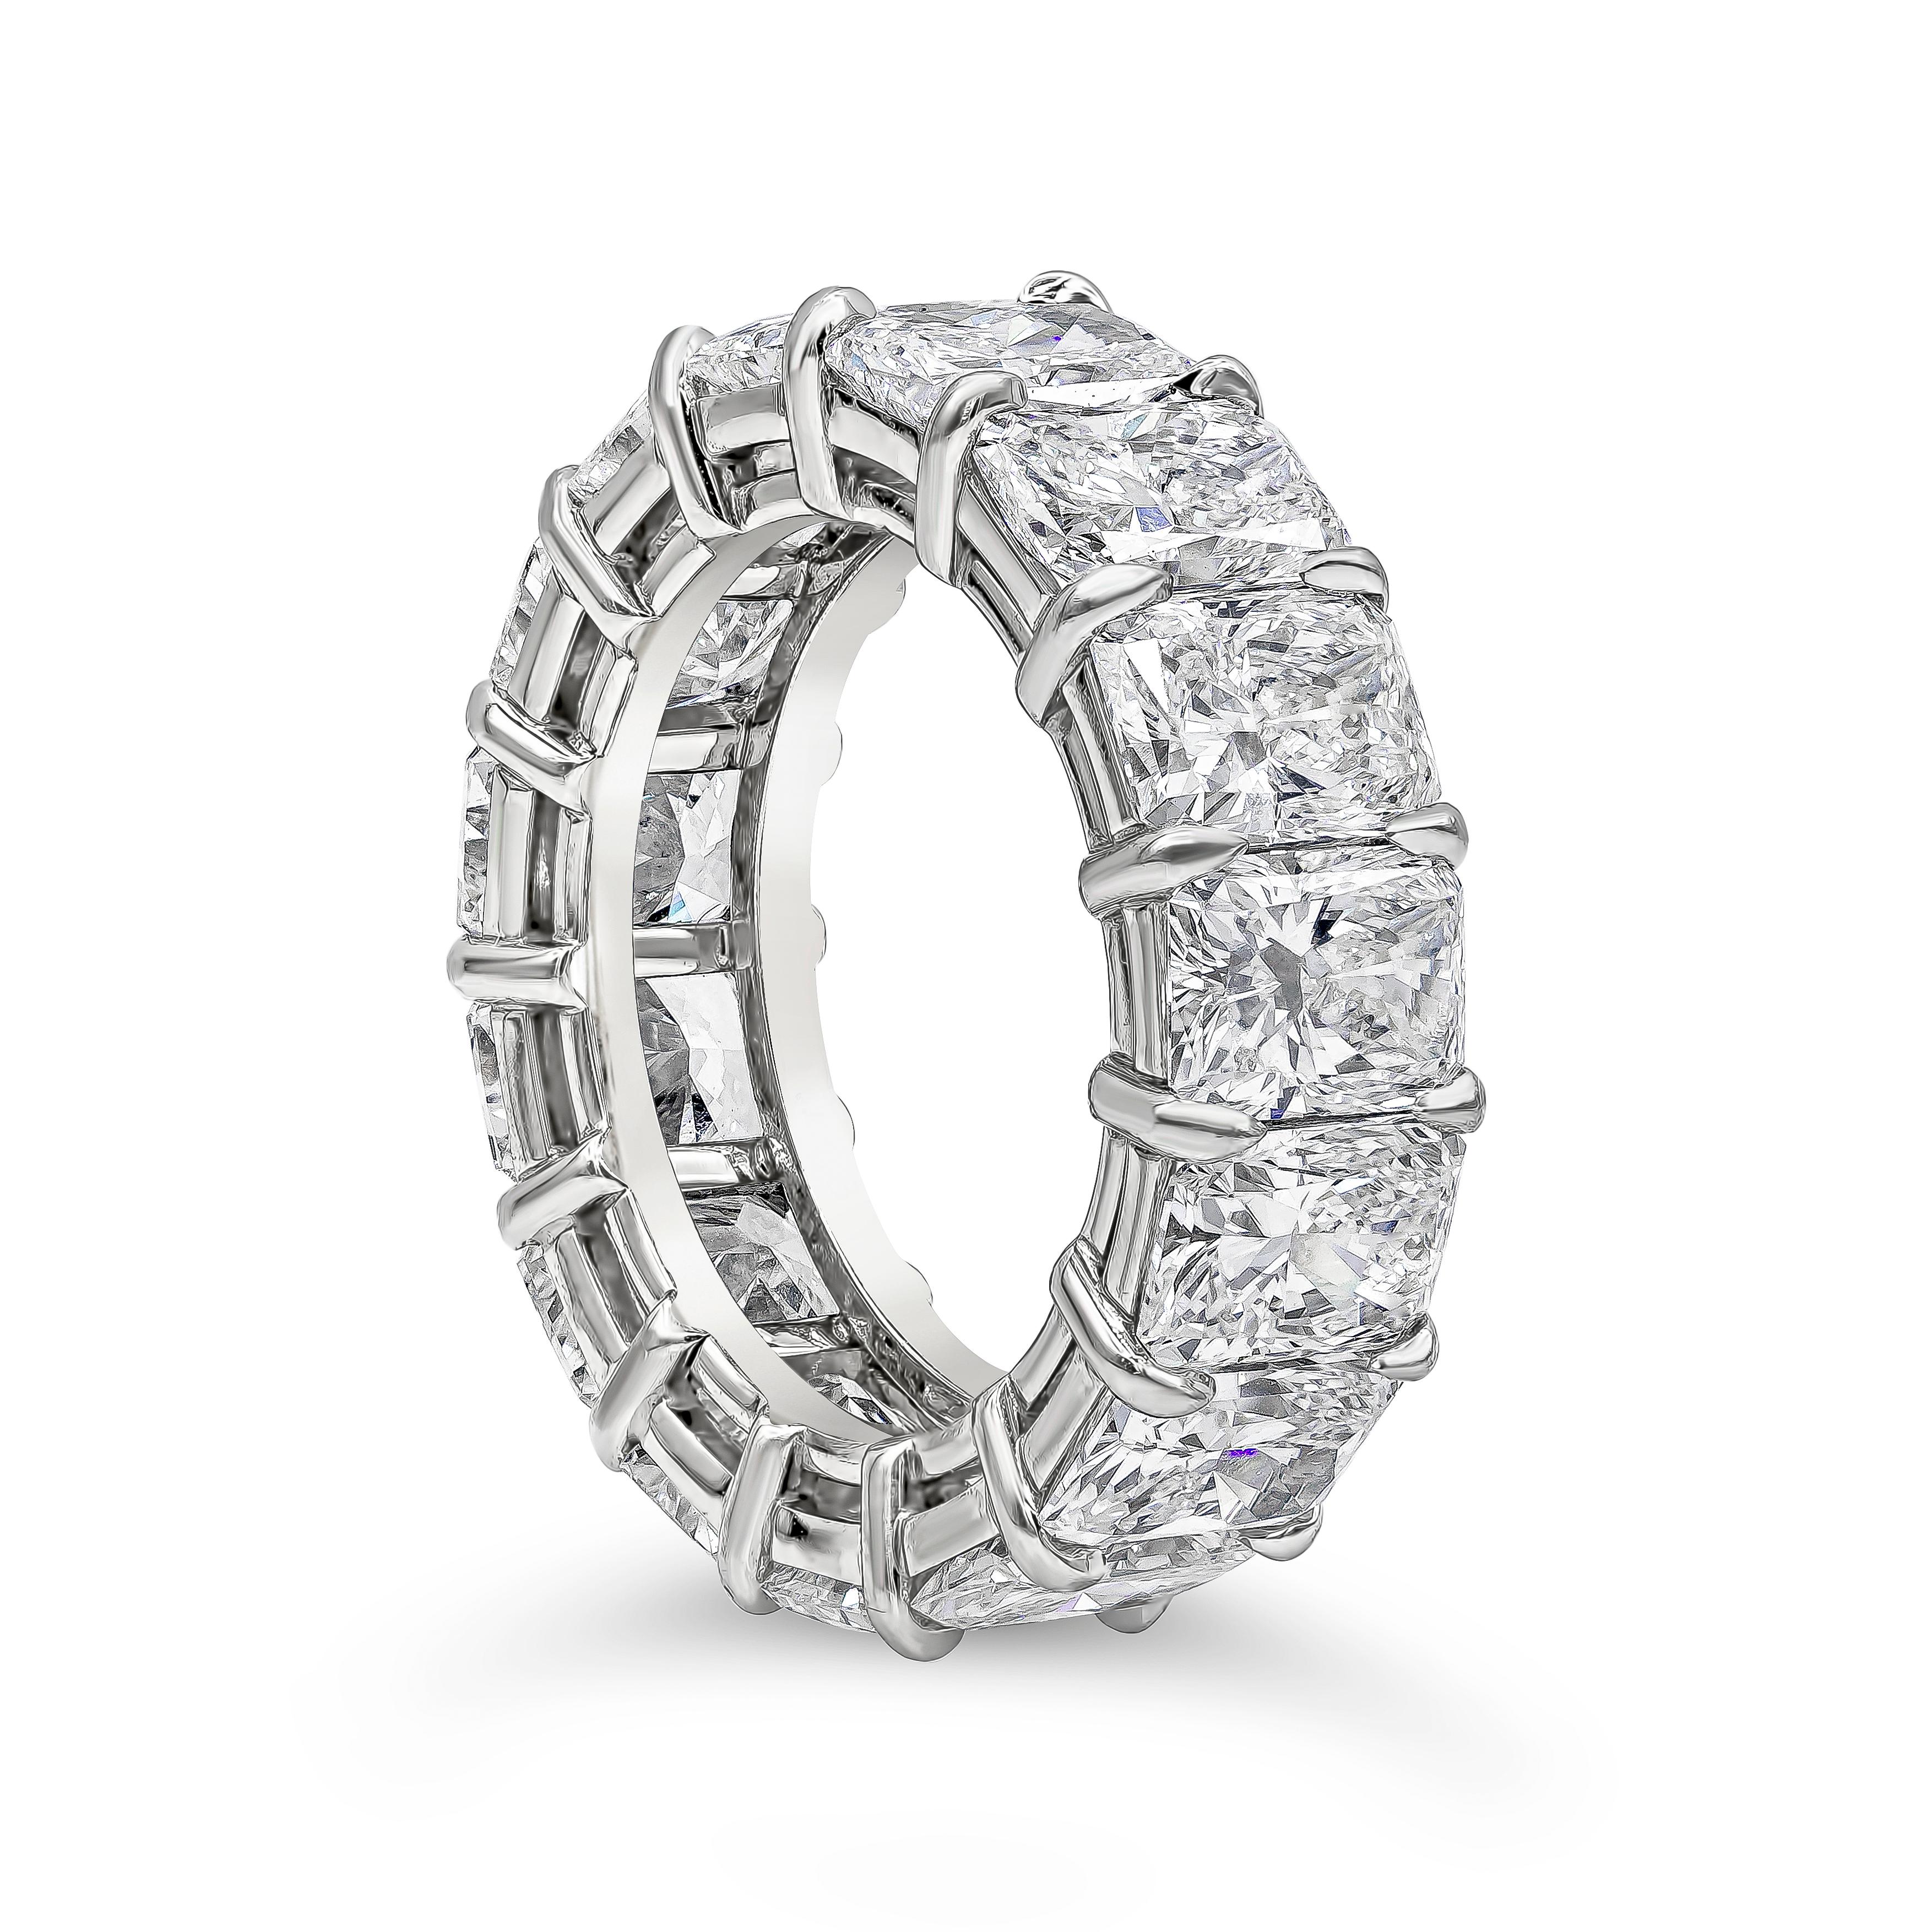 An important and classic eternity wedding band ring showcasing a row of all GIA certified brilliant radiant cut diamonds weighing 11.39 carats total, D-E Color and IF-VVS1 in Clarity respectively. Set in a handcrafted open-gallery style setting,